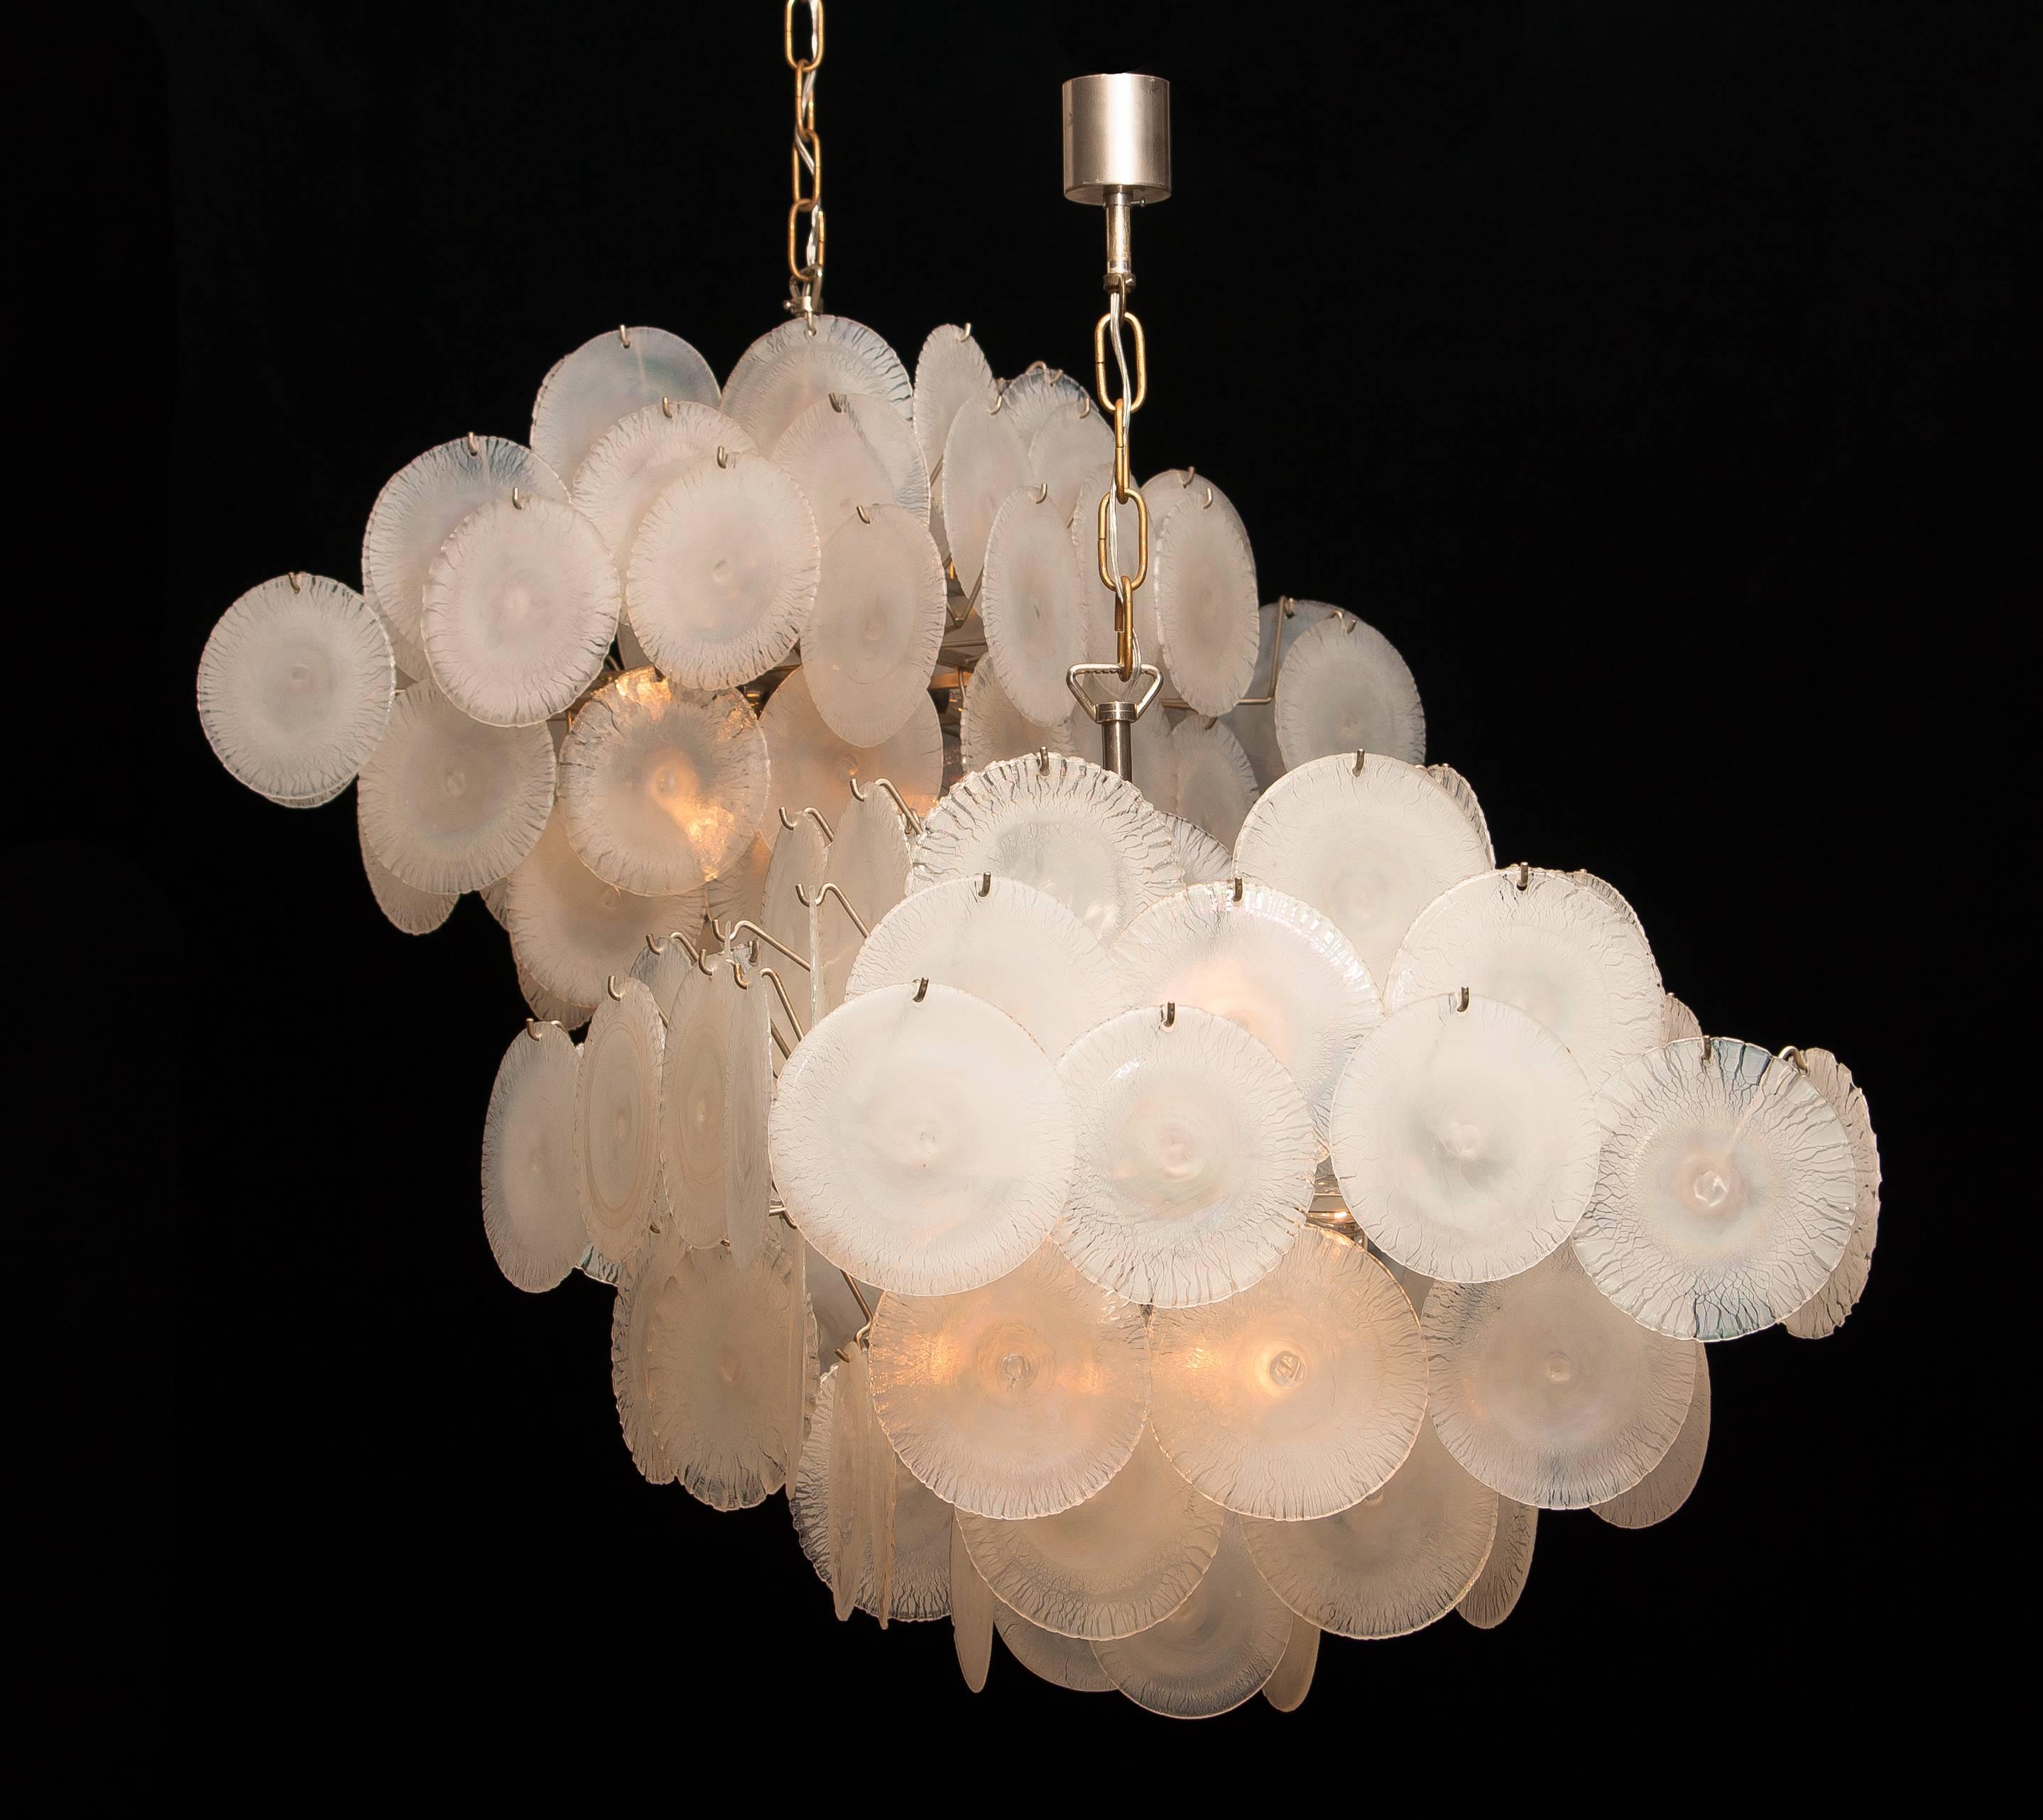 Extremely beautiful set of two Gino Vistosi chandeliers with white or pearl colored handmade Murano crystal discs. 

These Gino Vistosi chandeliers are made in Italy in the 1960s. The chandeliers contain 60 Murano white/pearl coloured crystal